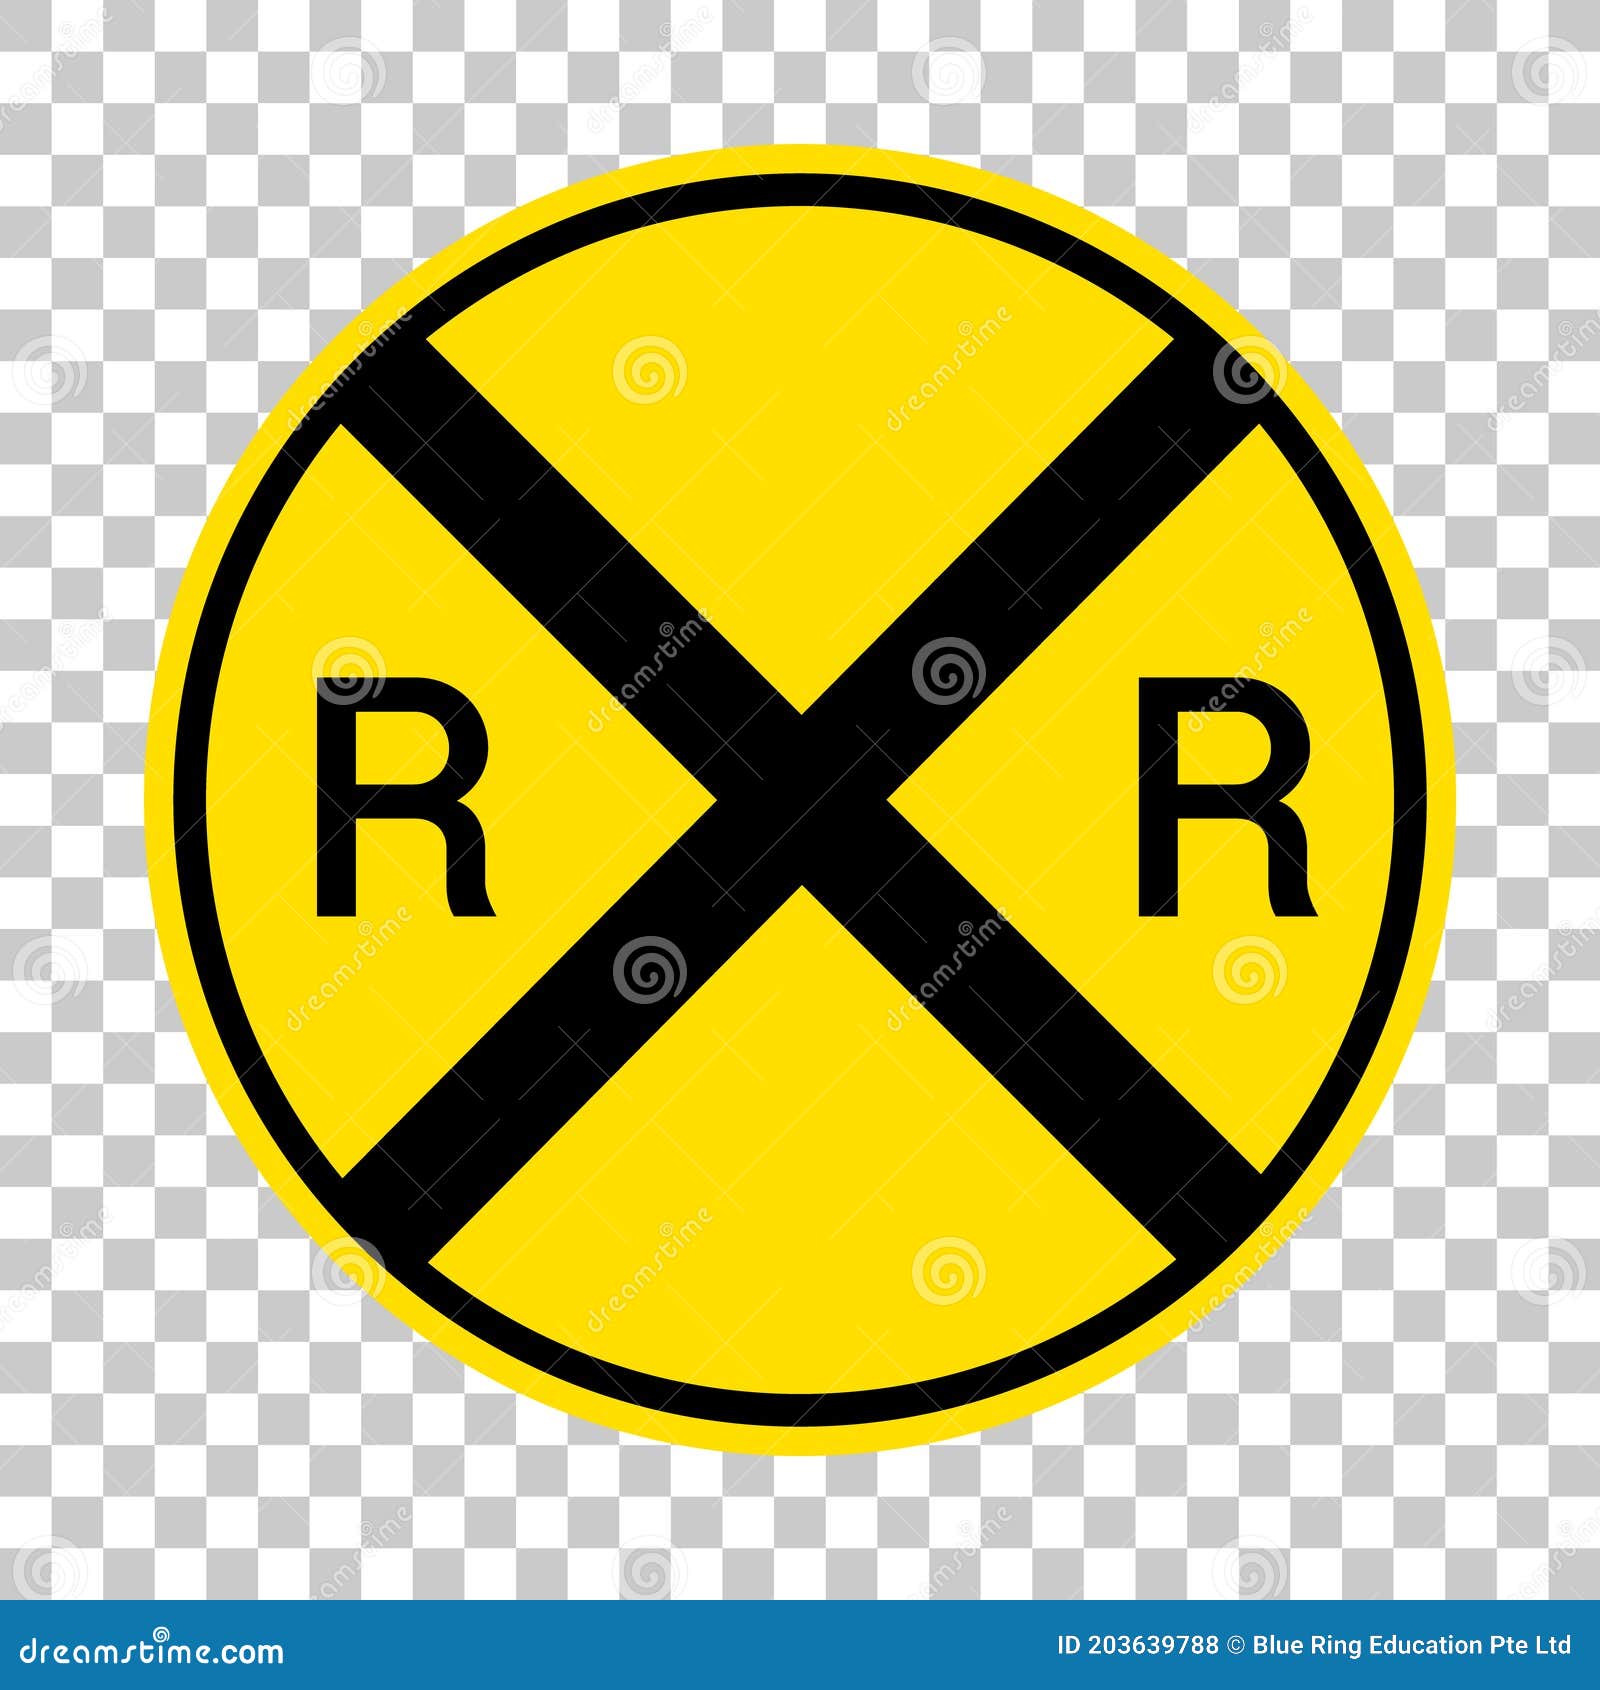 railroad crossing warning sign  on transparent background